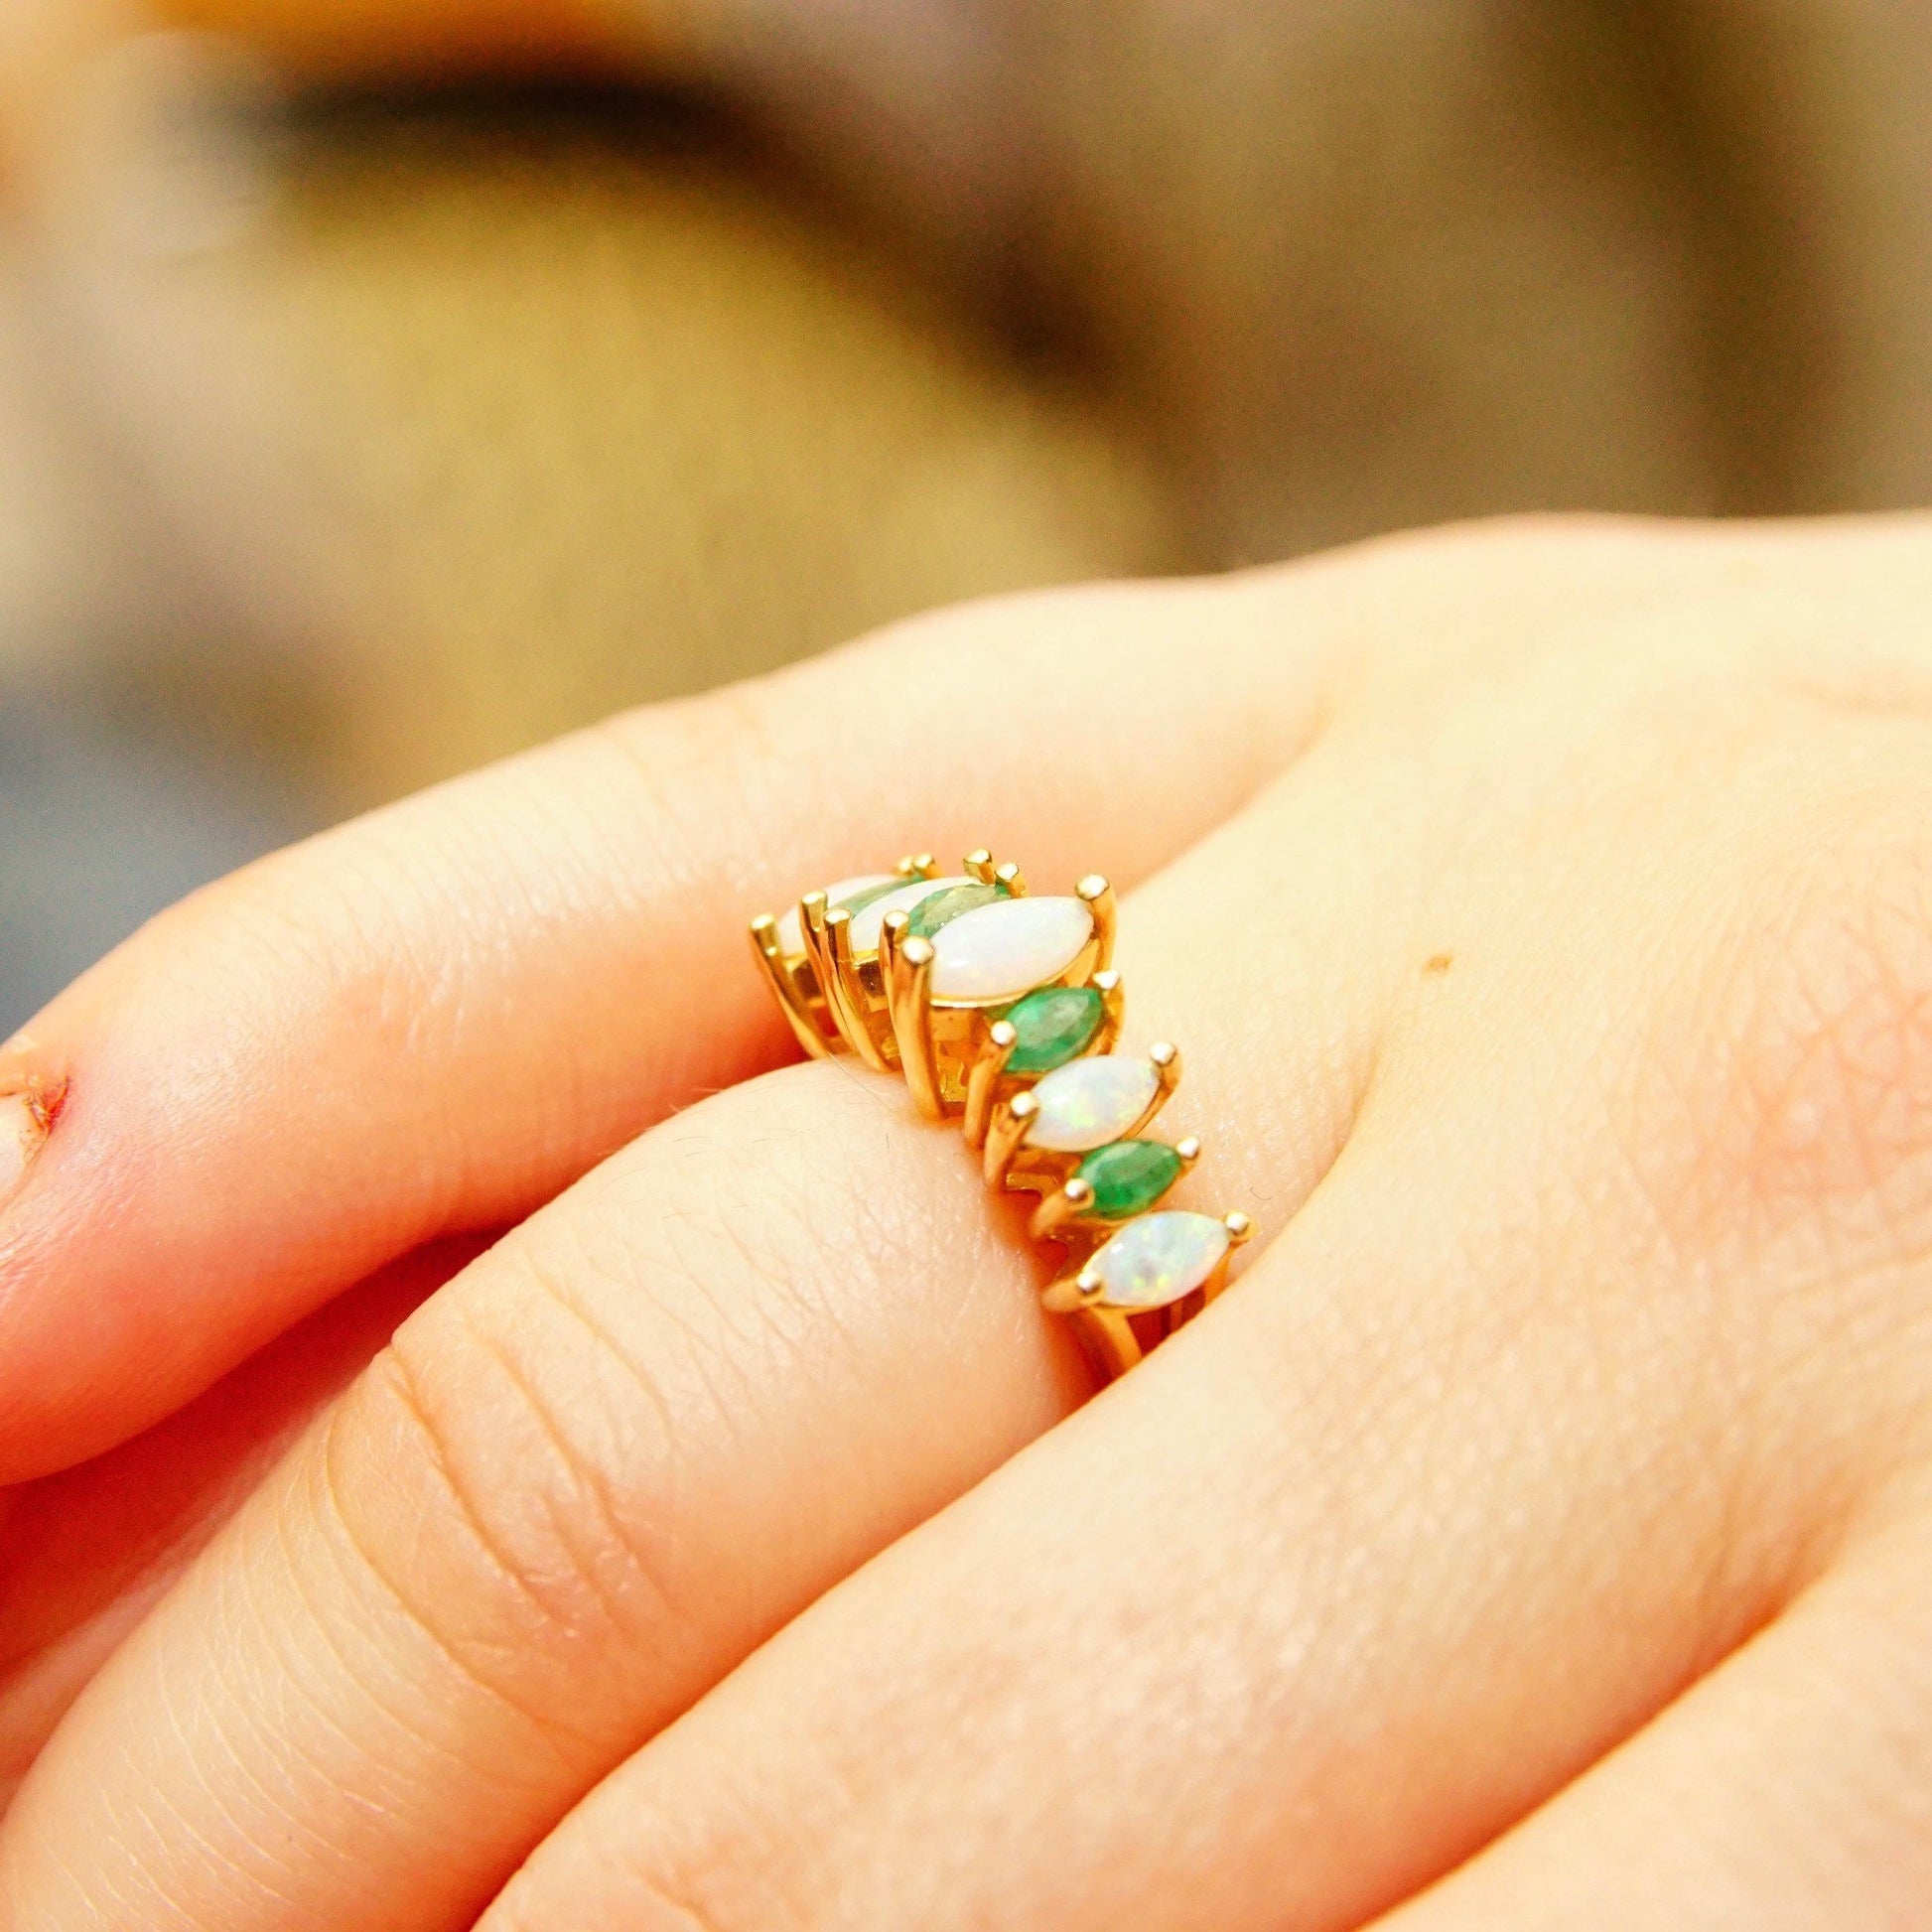 14K gold cocktail ring with marquise-cut opal center stone surrounded by emerald accents on a woman's hand, size 6 1/4 US, estate jewelry